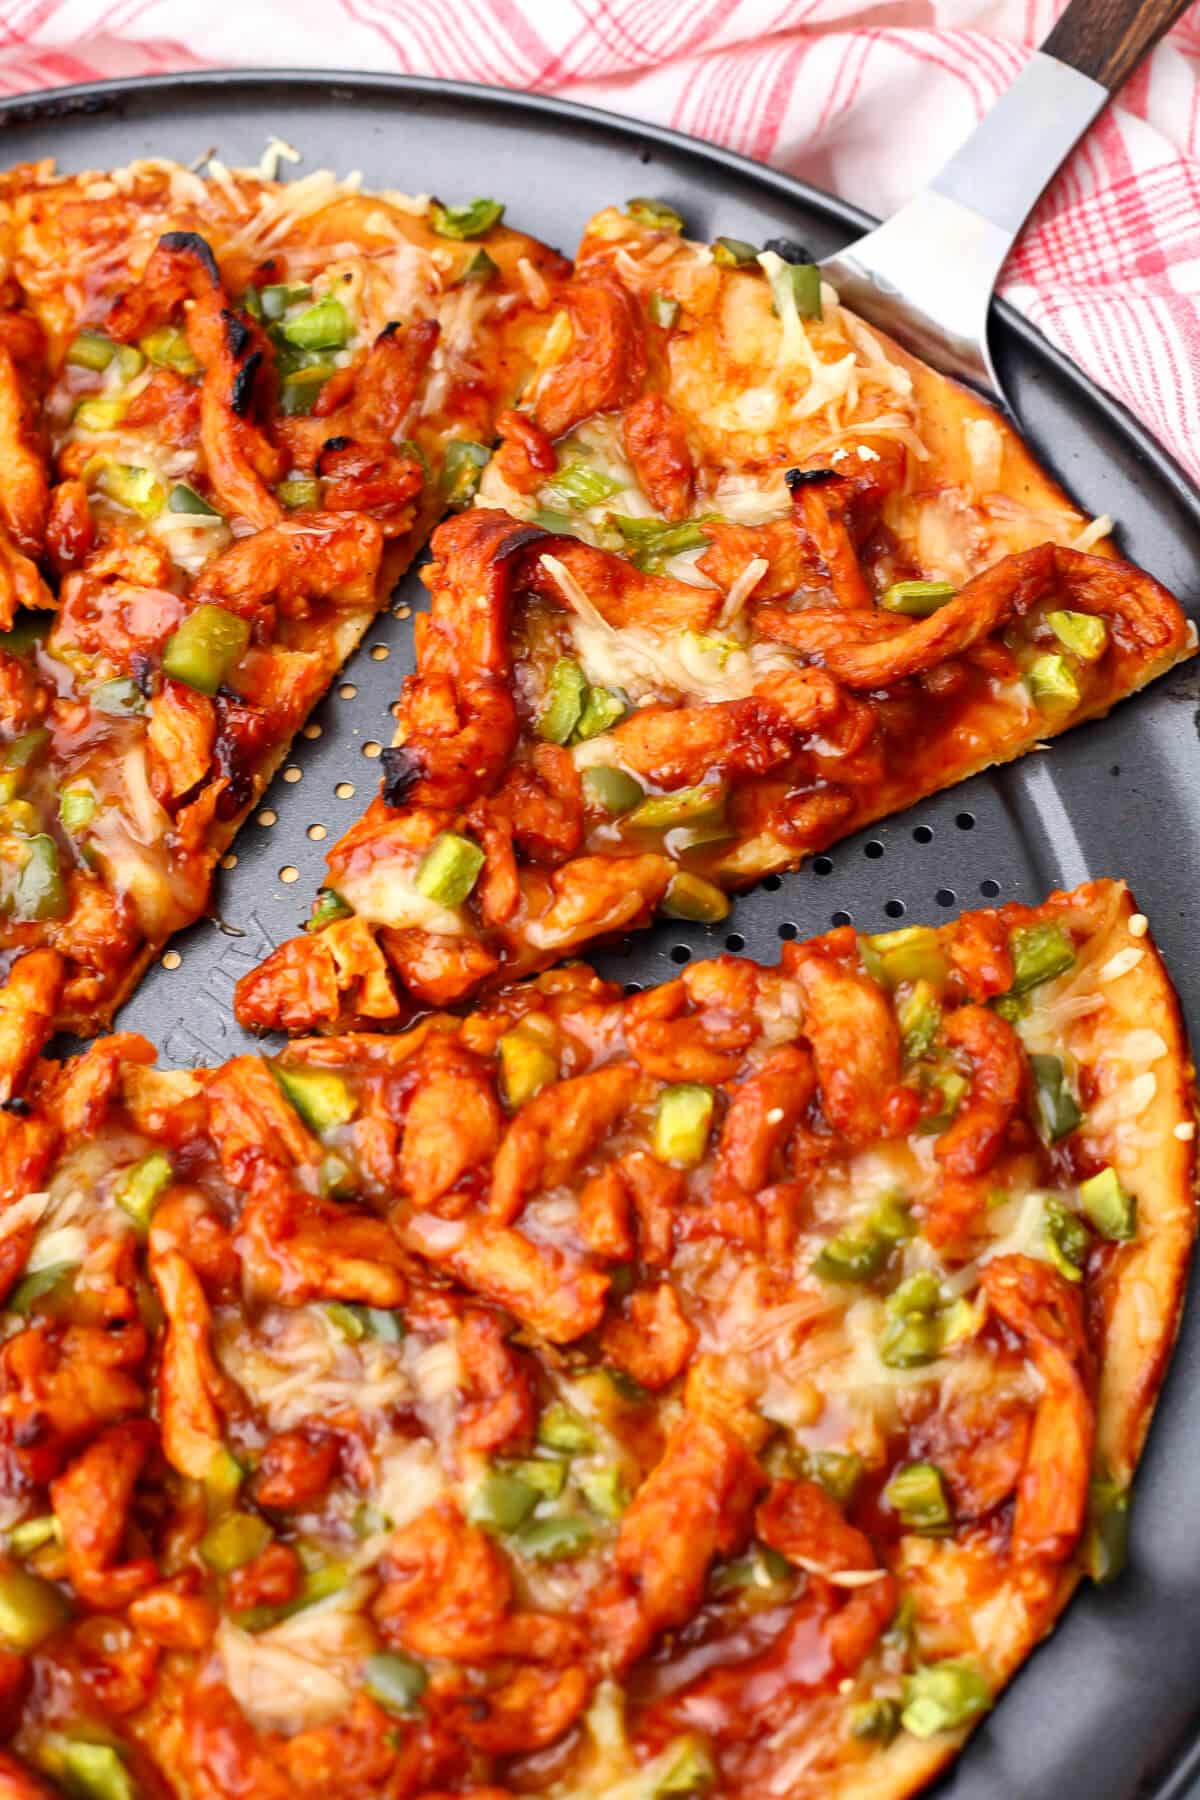 A vegan chicken BBQ pizza made with soy curls and green bell peppers with a slice being taken out of it.